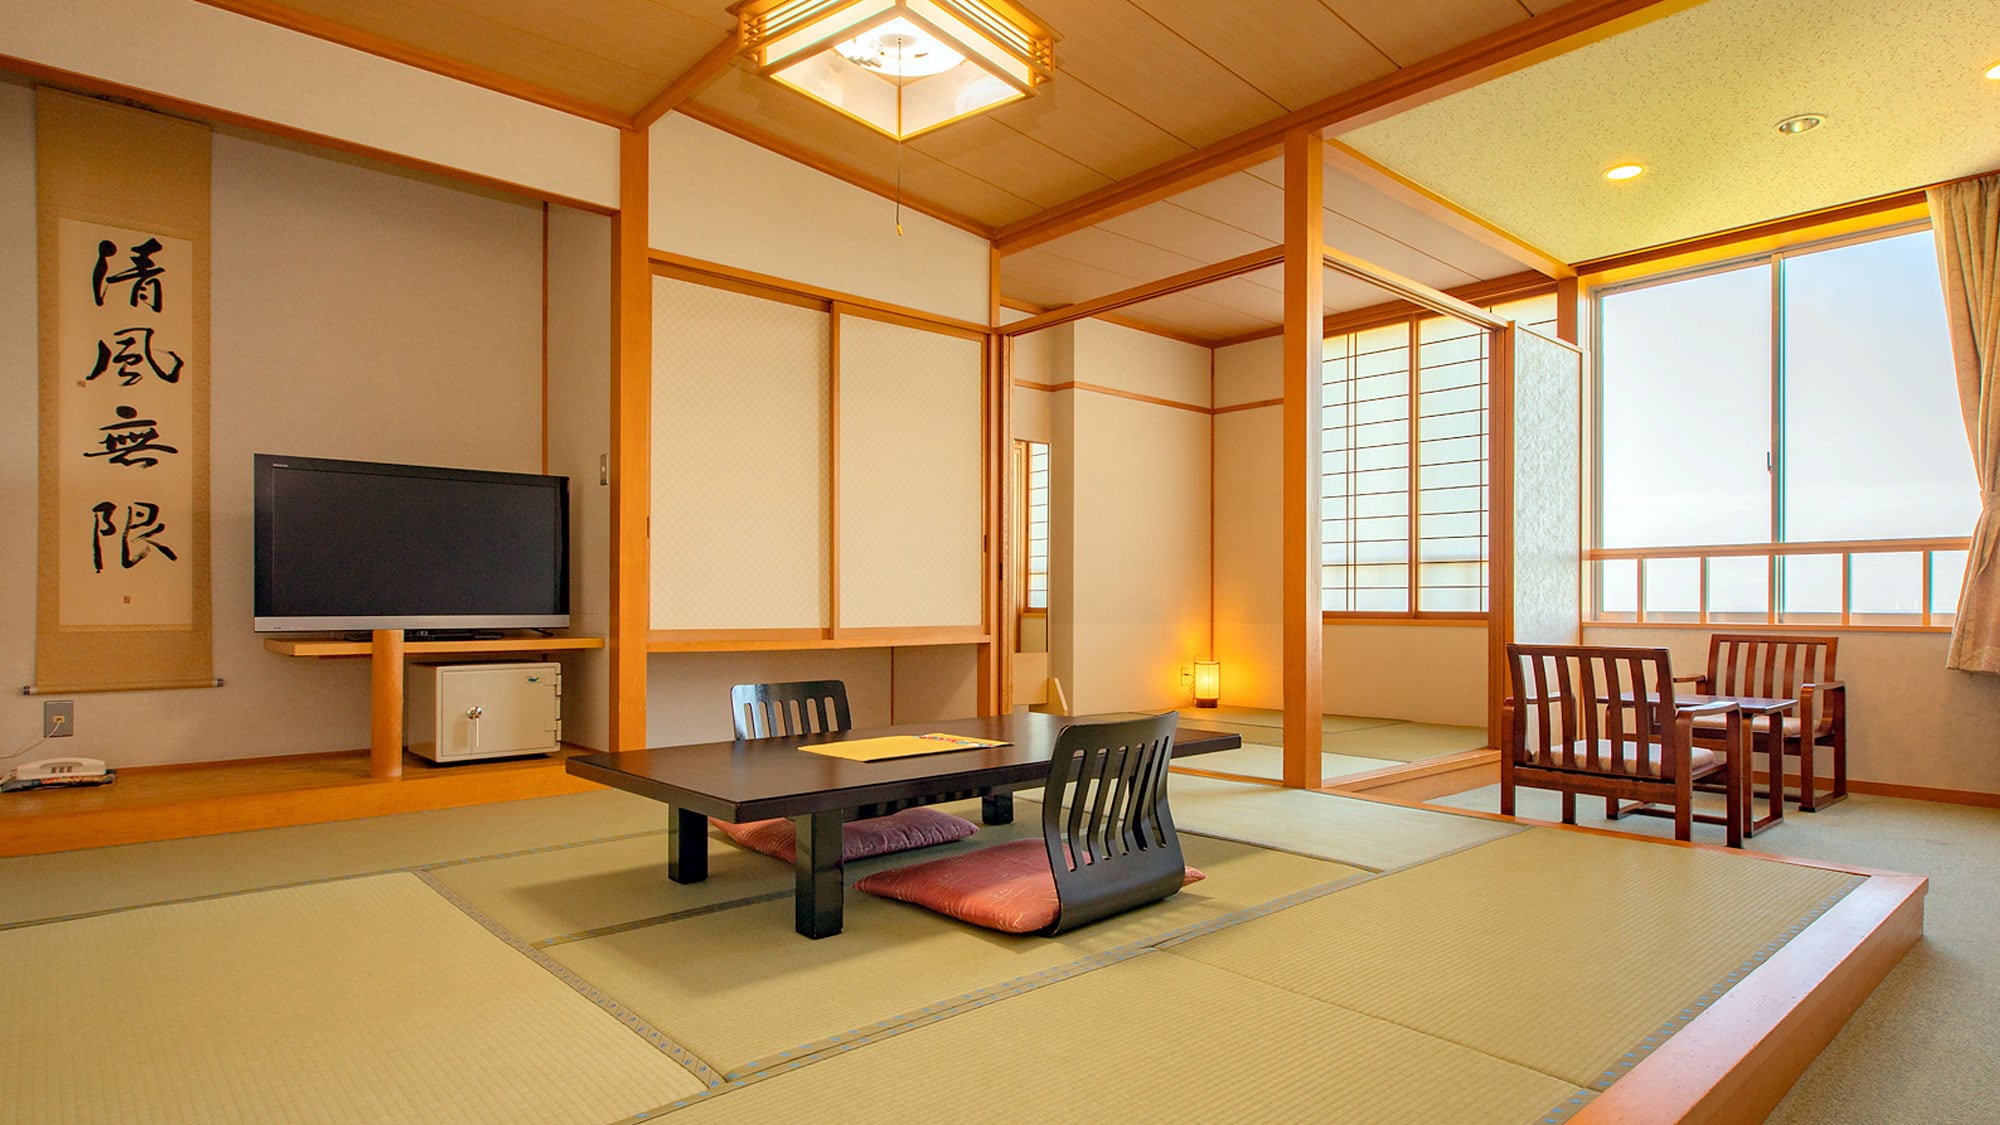 South Building type [Japanese-style room]